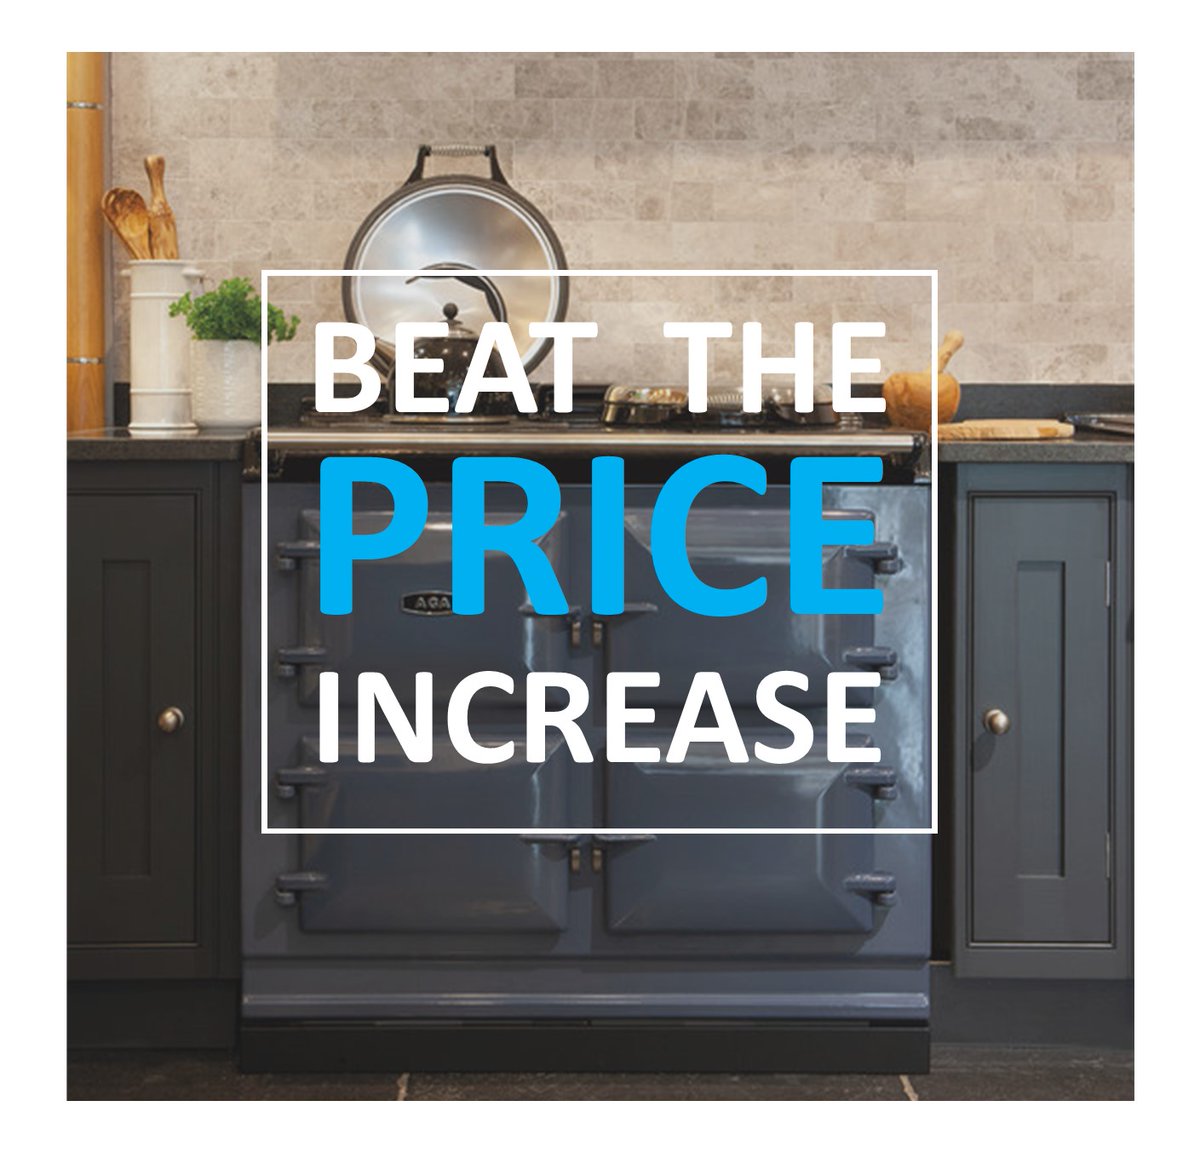 **BEAT THE PRICE INCREASE** Order your AGA cooker before 30th June and SAVE ££££'s @AGA_Official #AGA #northwales #castironcooking #agaliving #beatthepriceincrease